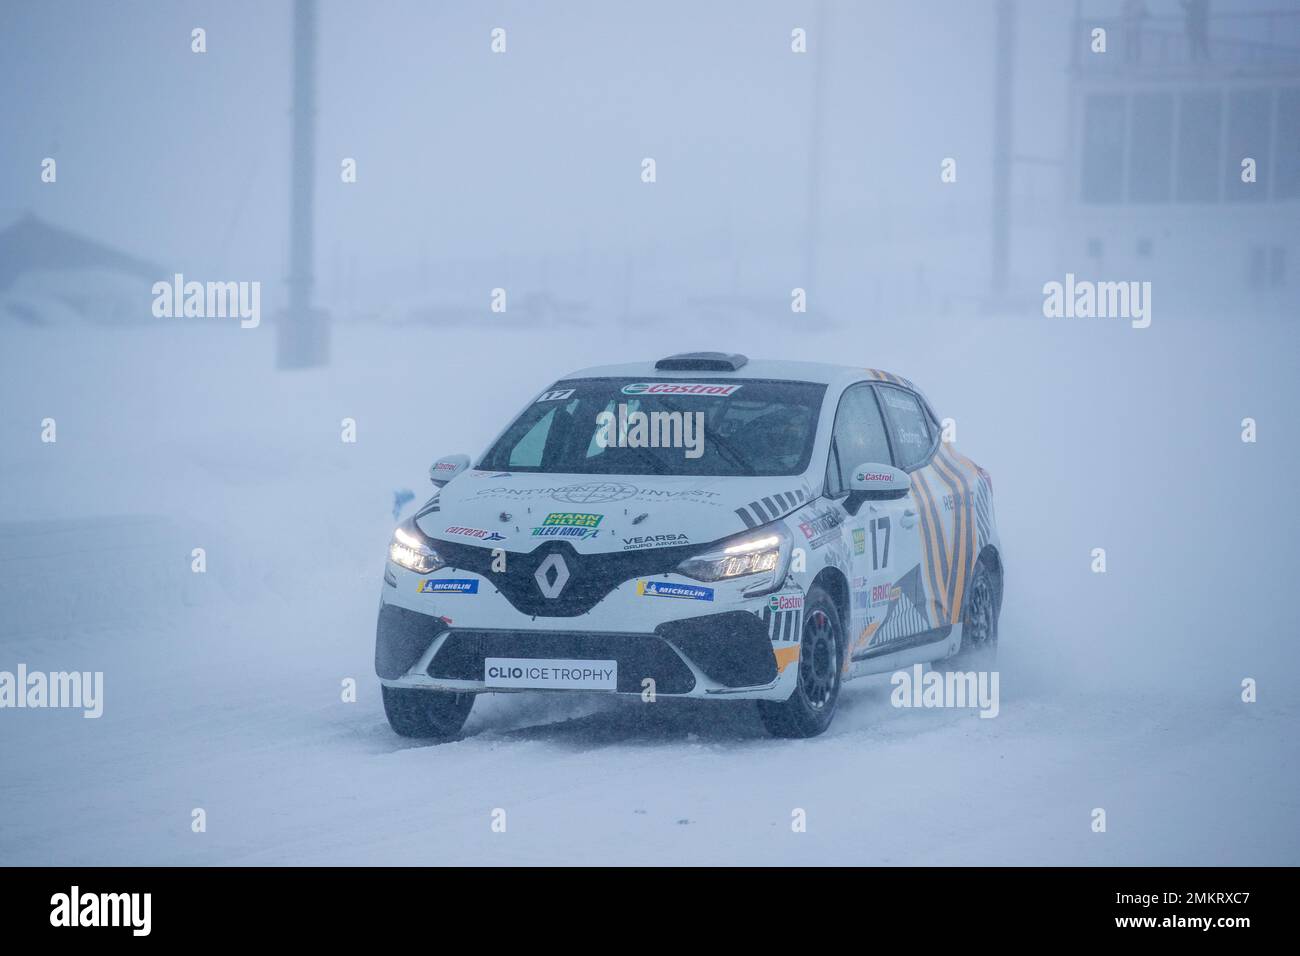 17A Mathieu LANNEPOUDENX (FR), BRUNET COMPETITION, action 17B Joaquin RODRIGO (ES), BRUNET COMPETITION, action` during the 2023 Clio Ice Trophy 2023 - GSeries G2 on the Circuit Andorra - Pas de la Casa, on January 28, 2023 in Encamp, Andorra - Picture Damien Doumergue / DPPI Stock Photo